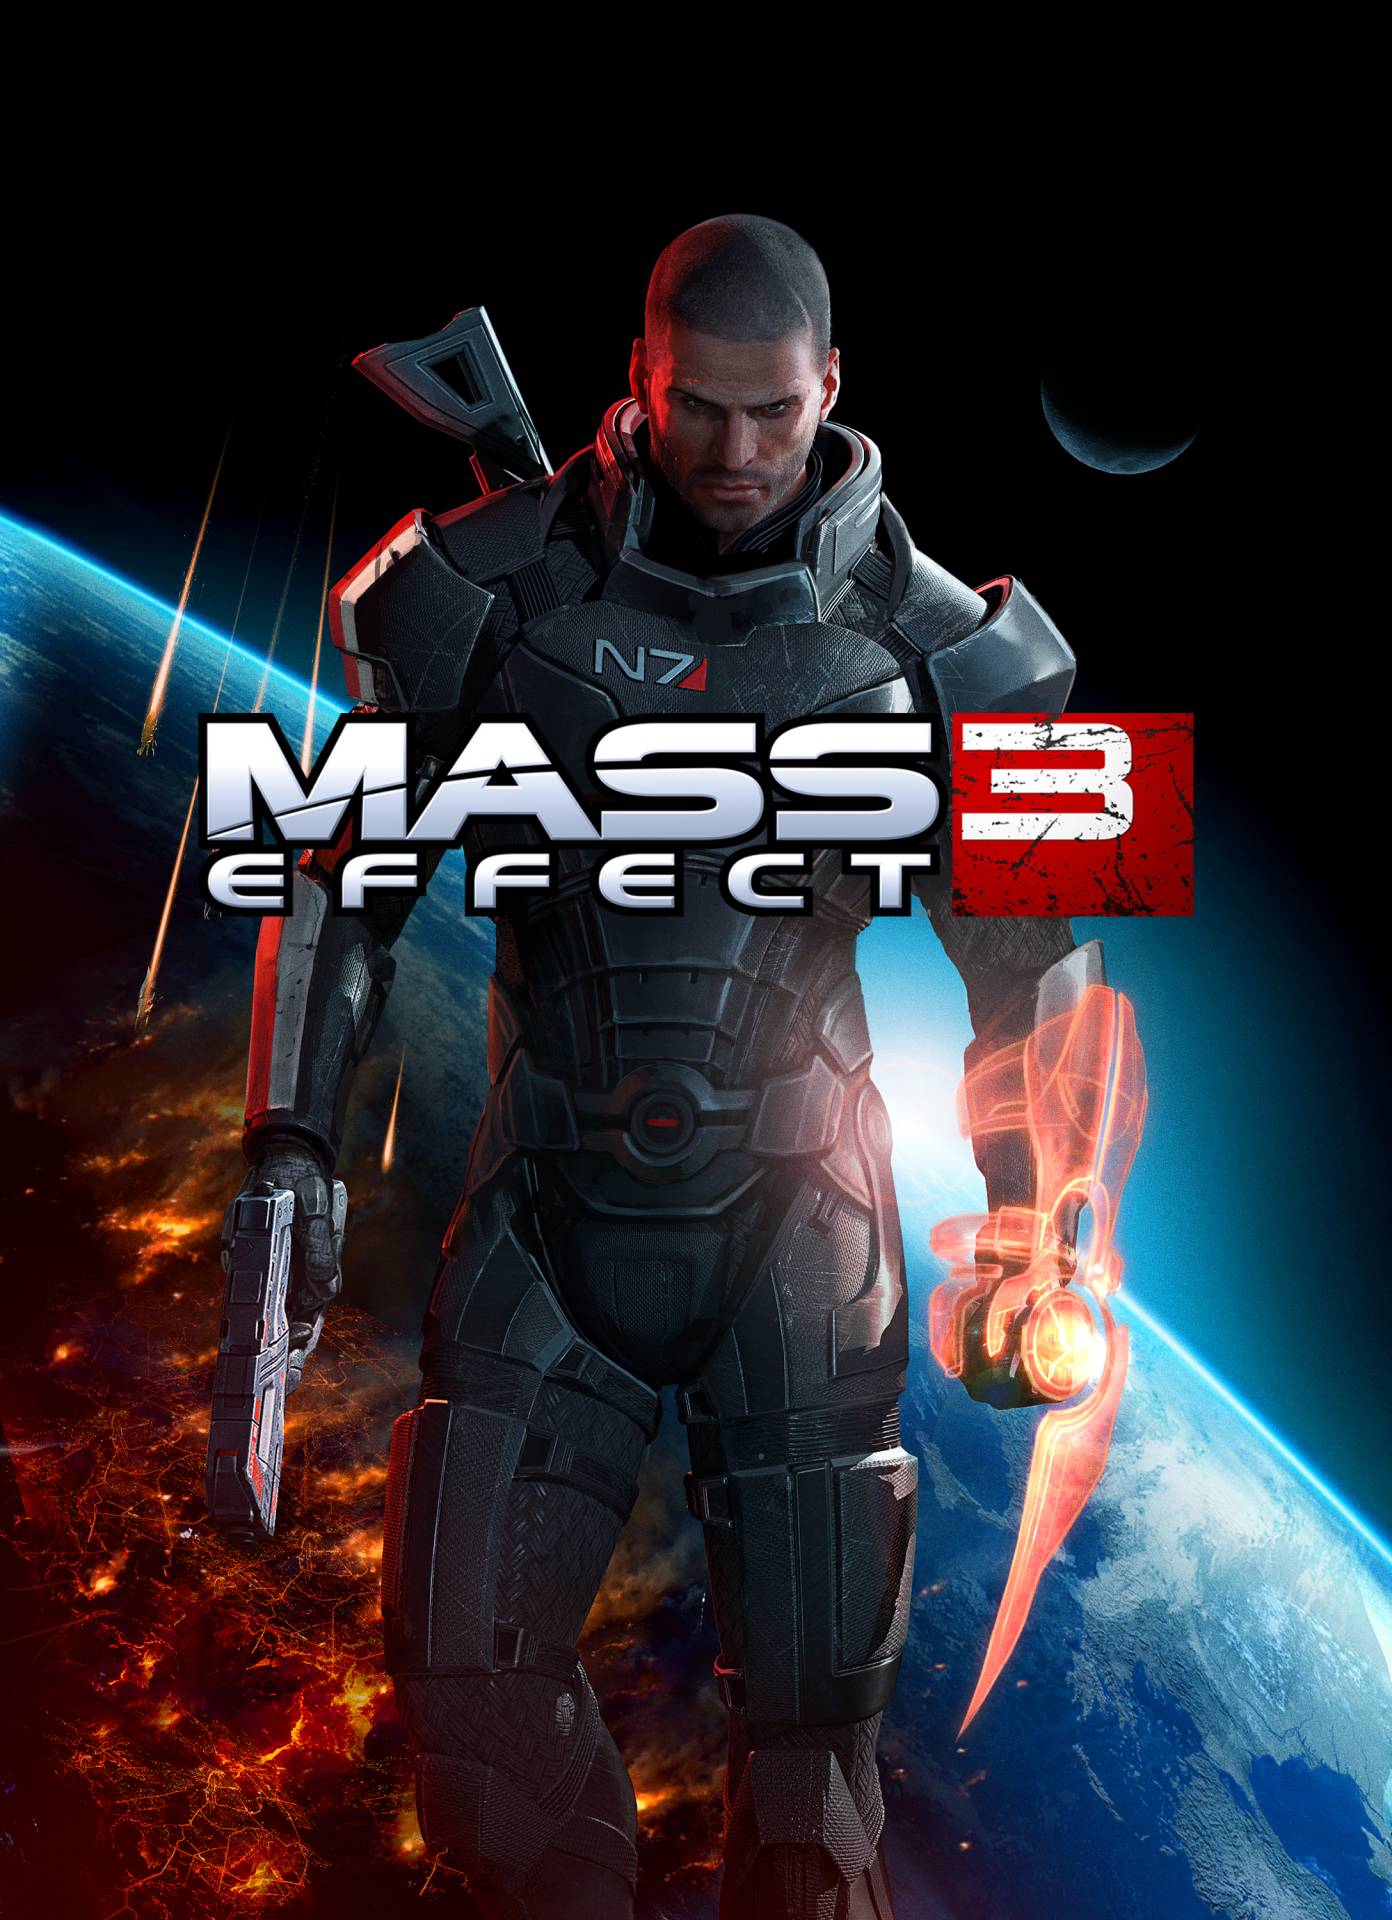 So... Mass Effect 3 syndrome then?